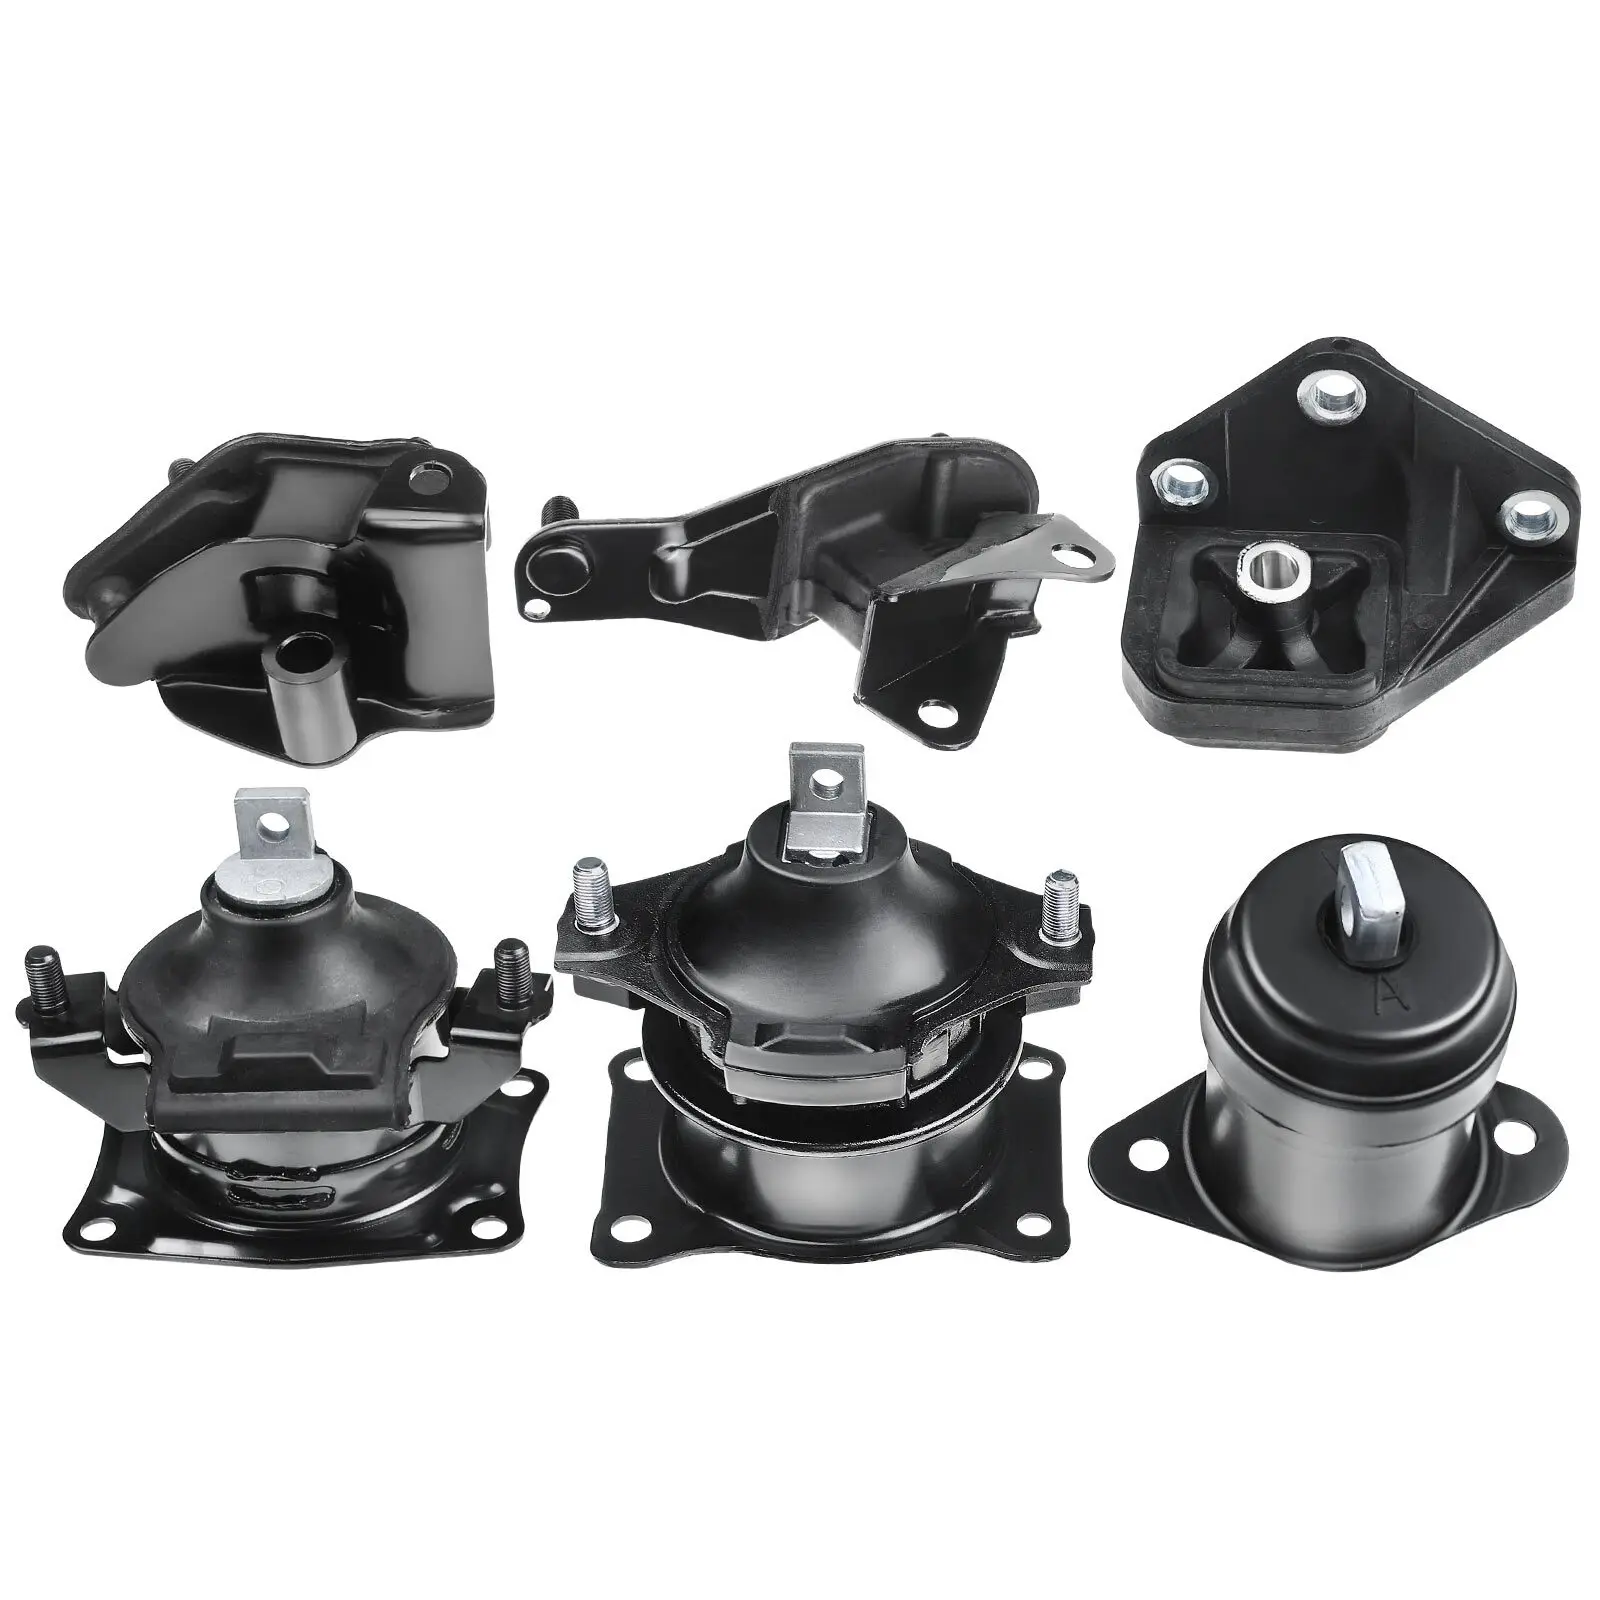 

In-stock CN US 6x Motor Mount Transmission Mount for Honda Accord 2003-2007 L4 2.4L Automatic A4517